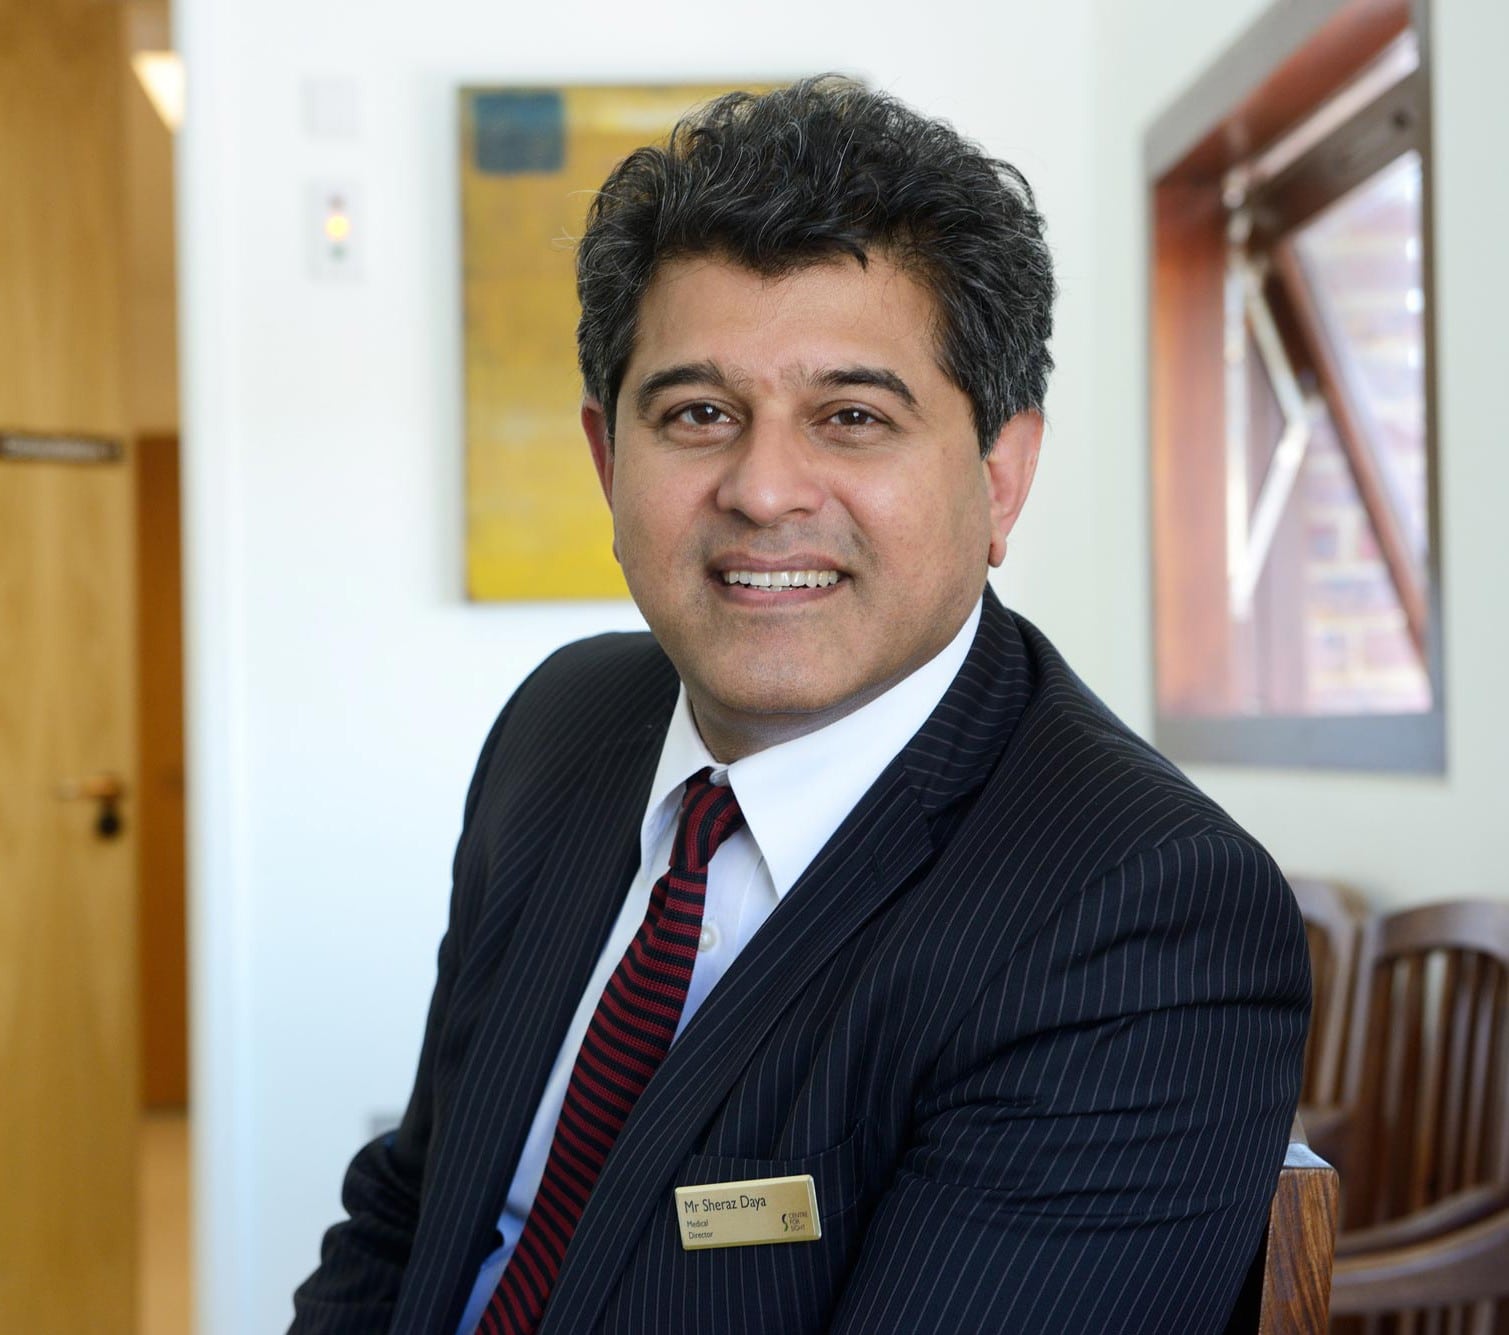 Sheraz Daya listed amongst top 50 in The Ophthalmologist 2019 Power List